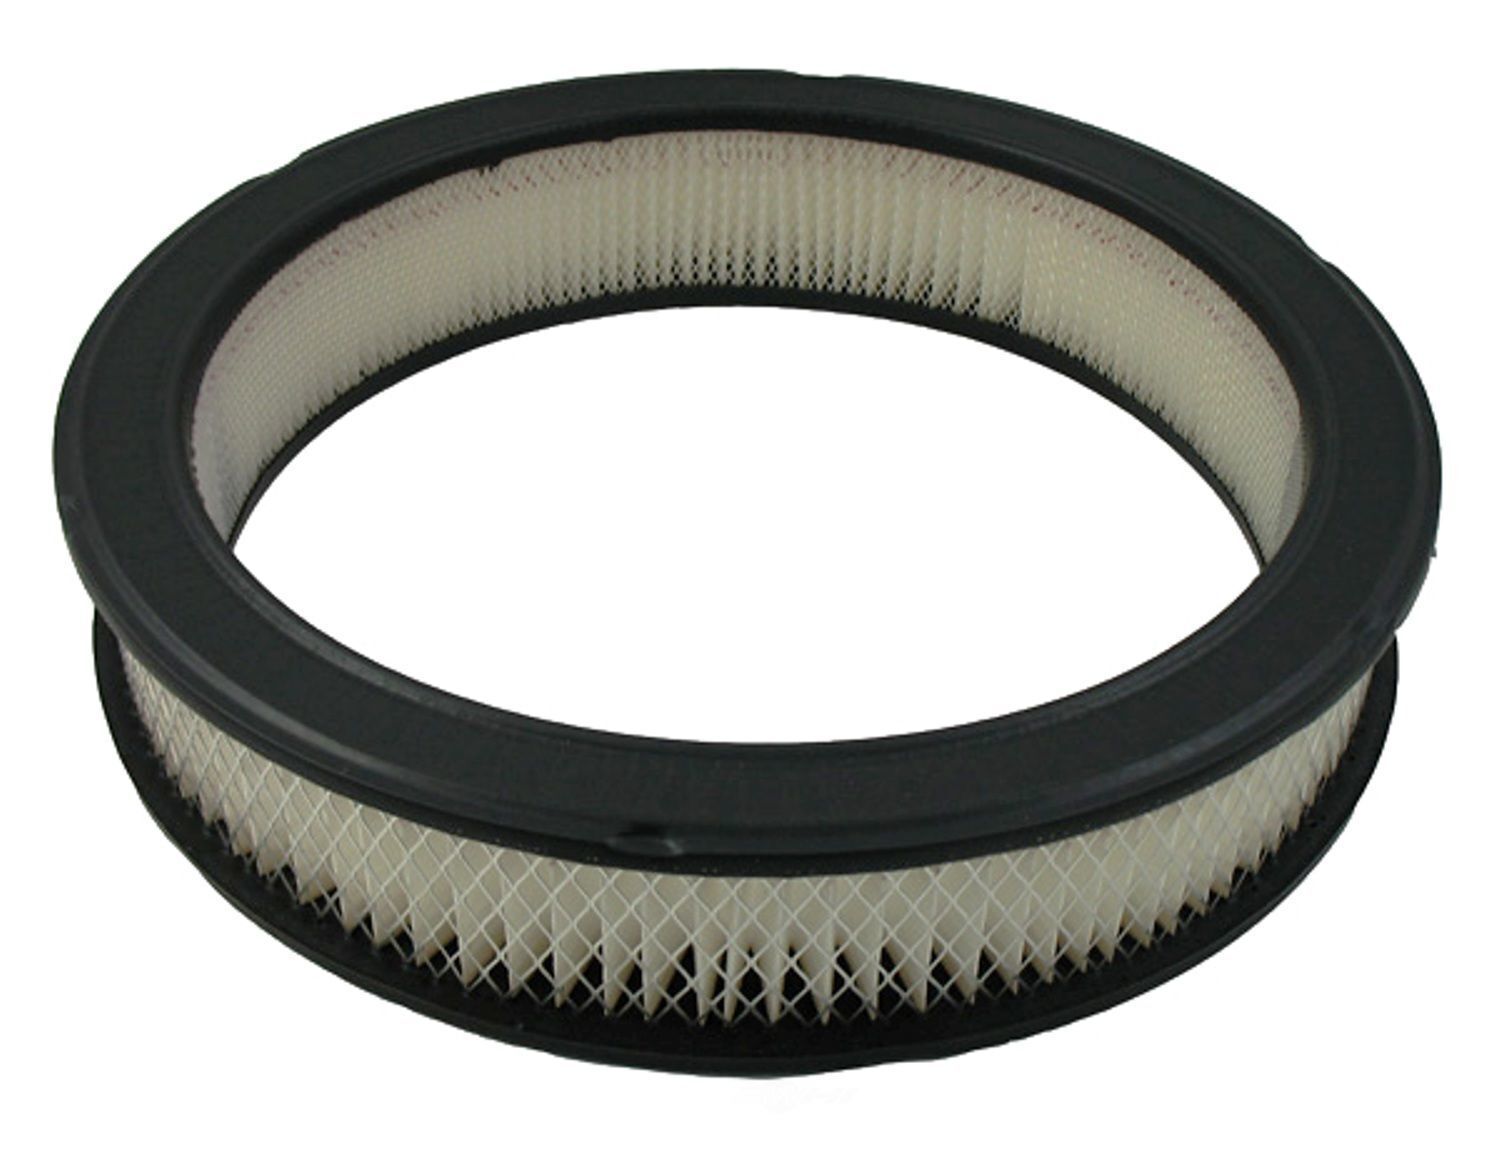 Air Filter for Chevrolet Camaro 1976-1992 with 5.0L 8cyl Engine